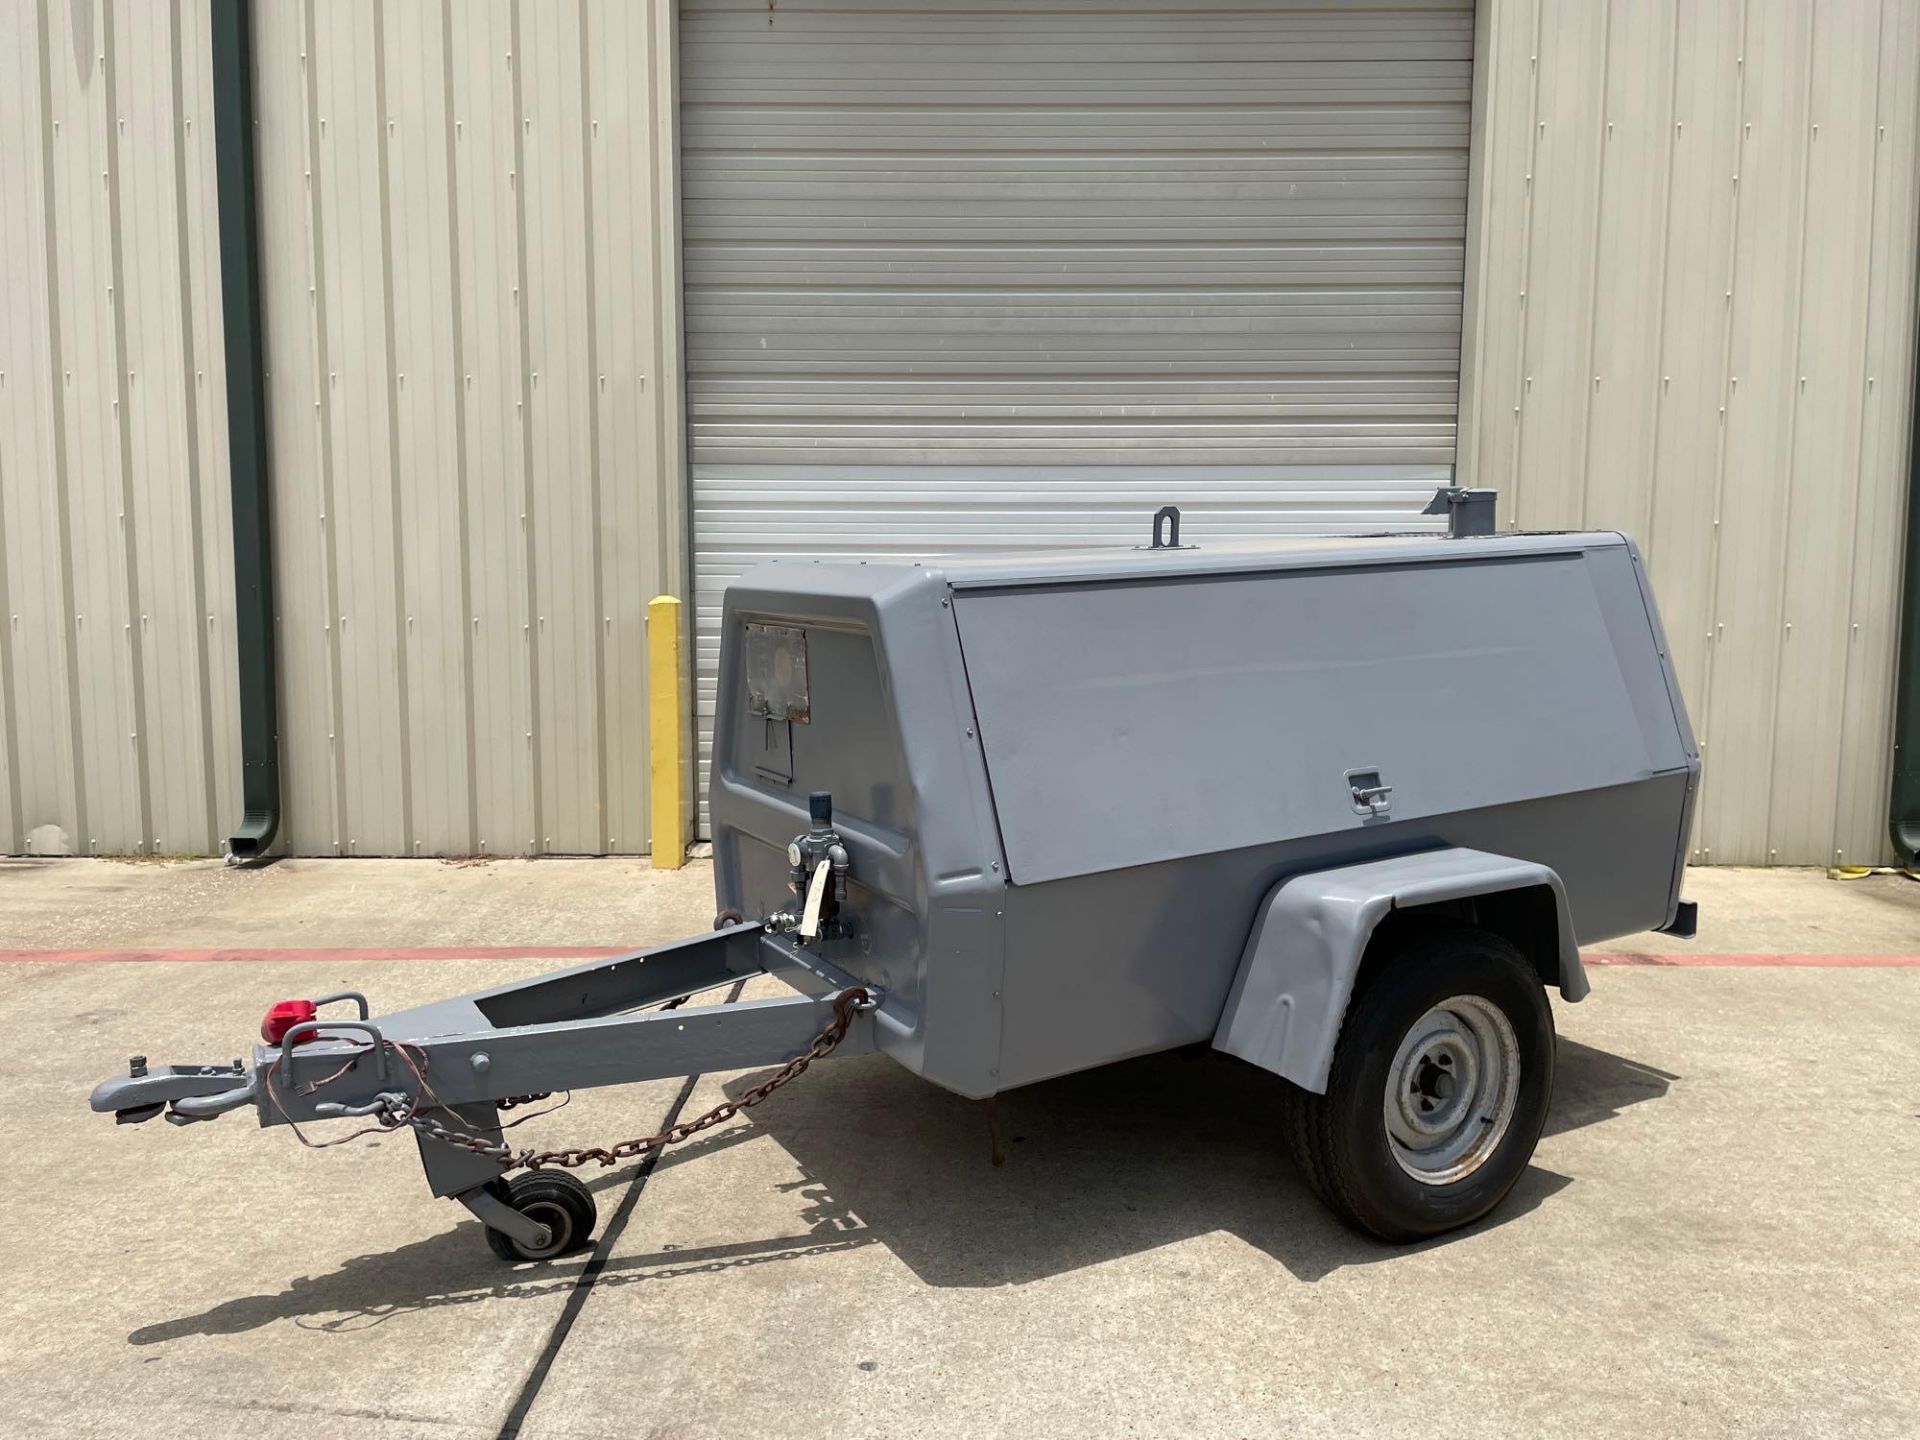 Ingersoll Rand Portable Air Compressor with Diesel Engine